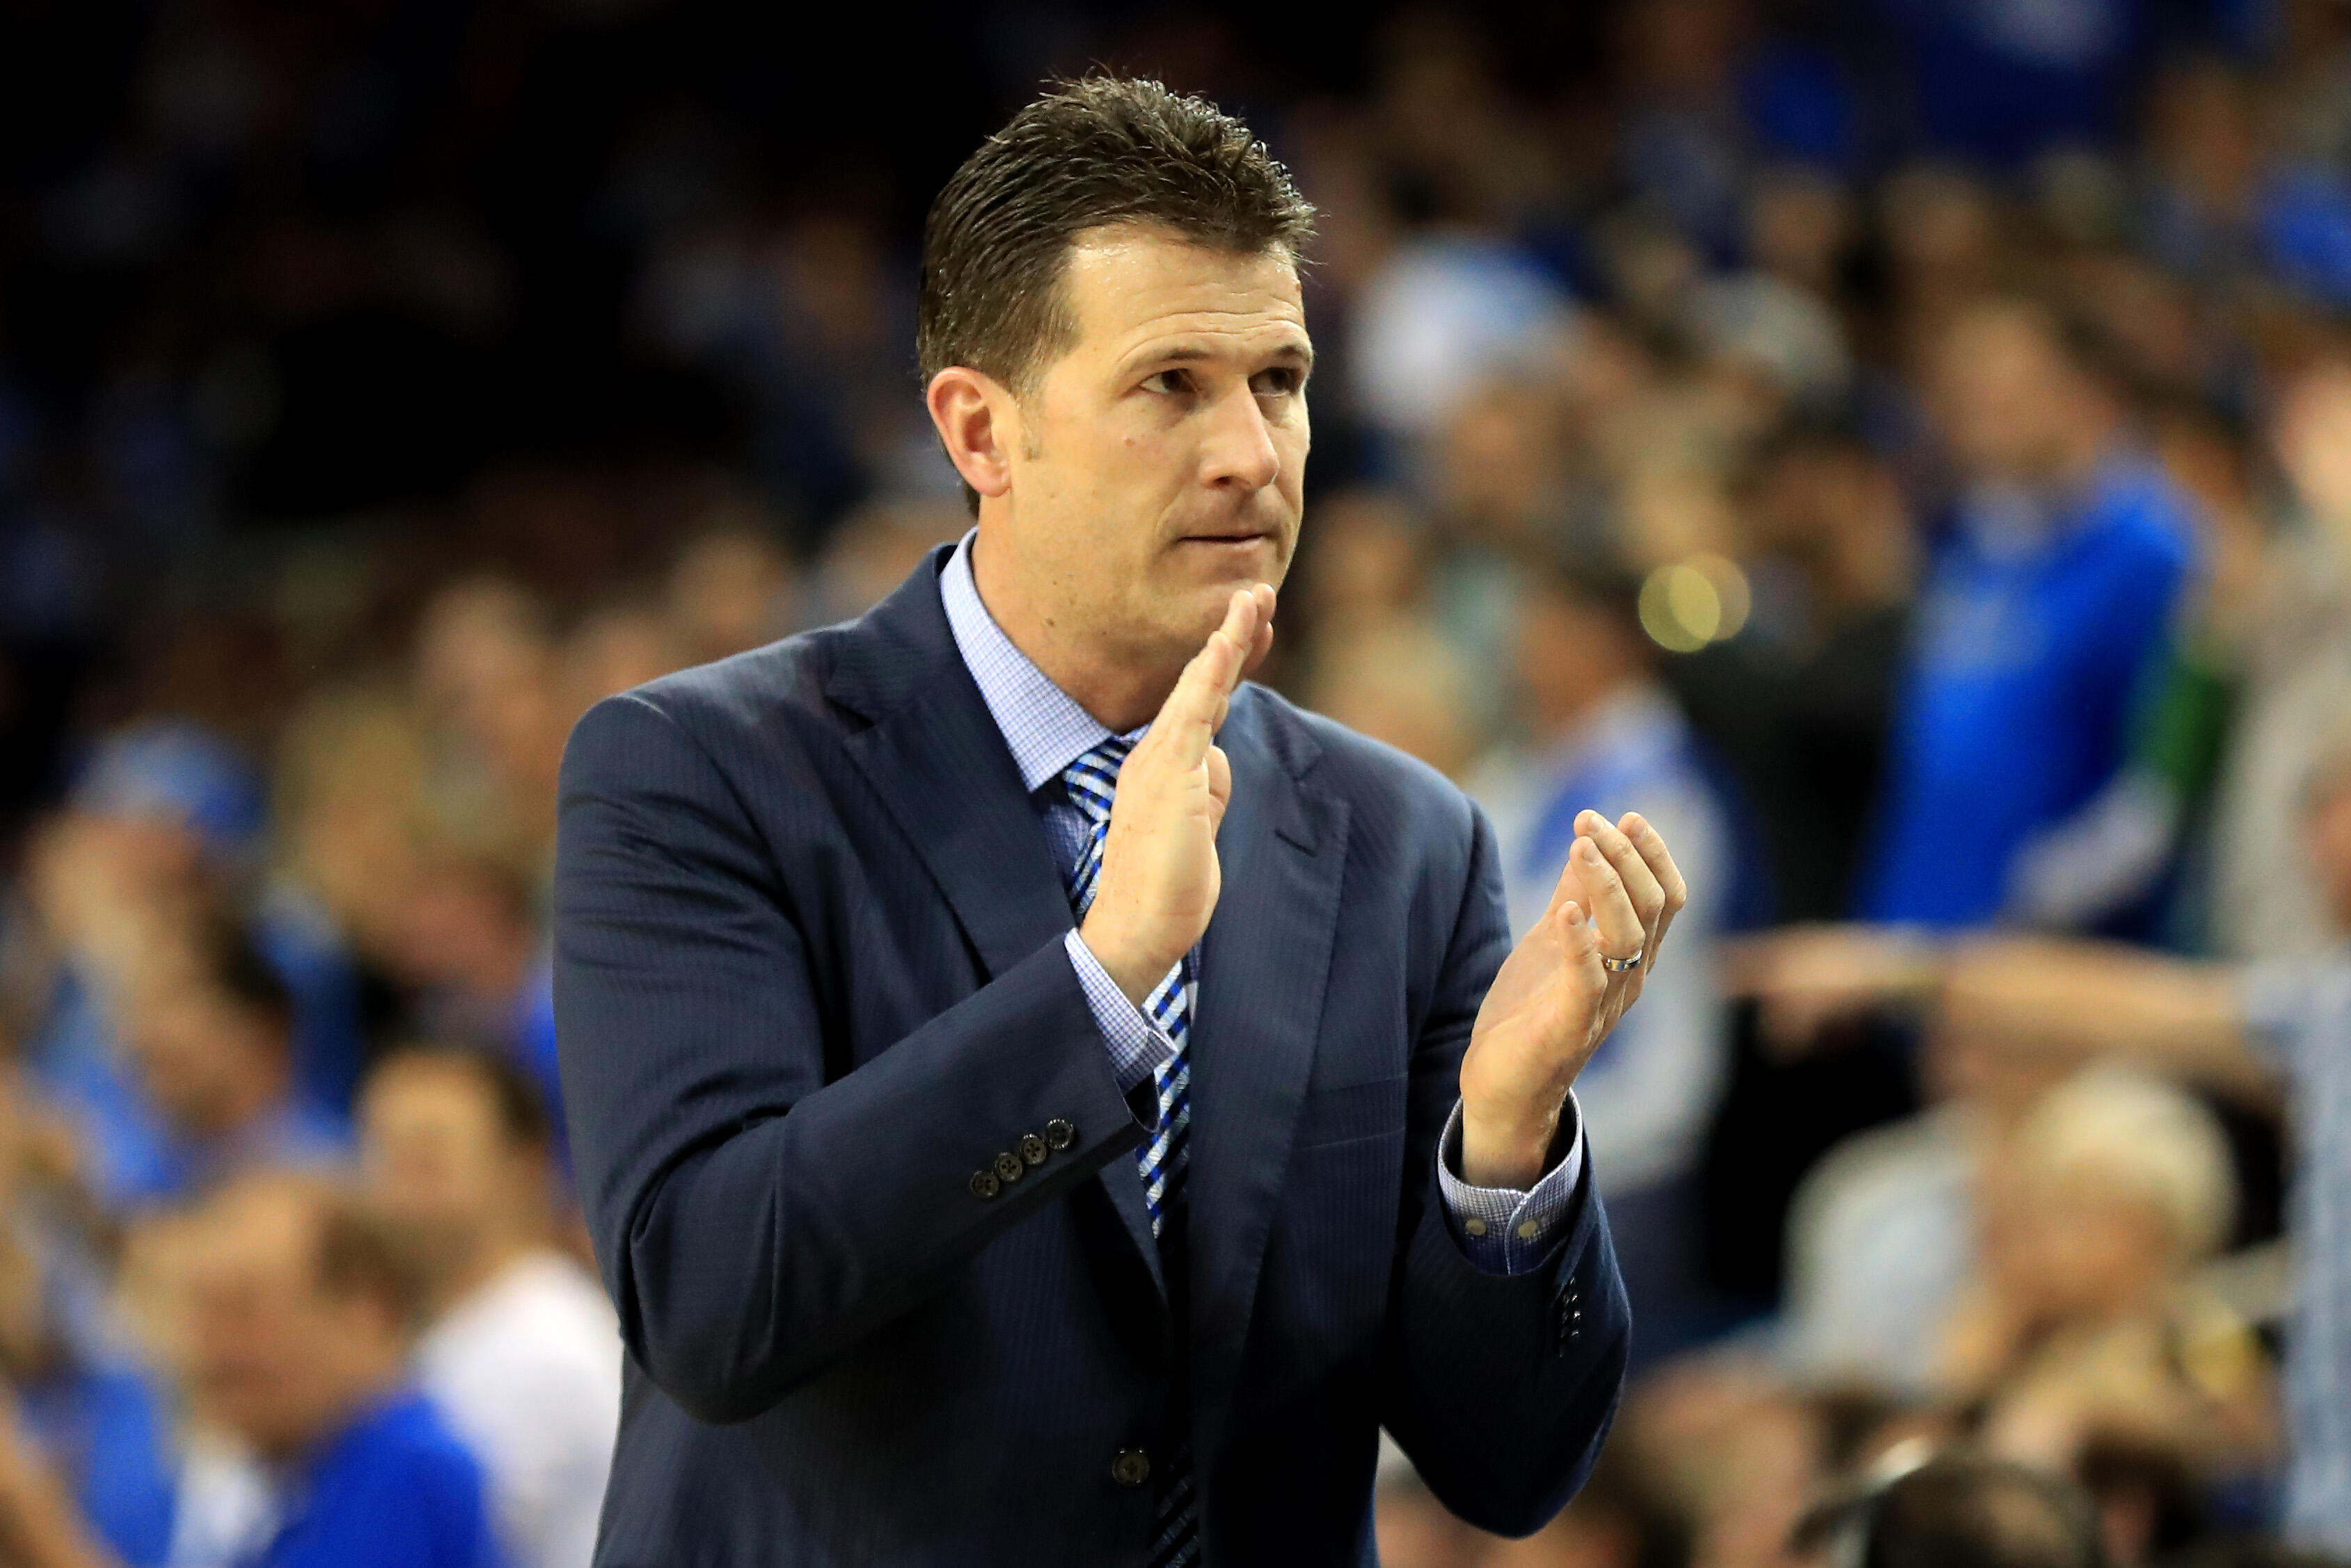 LOS ANGELES, CA - FEBRUARY 18:  Head Coach Steve Alford of the UCLA Bruins reacts during the second half of a game against the USC Trojans  at Pauley Pavilion on February 18, 2017 in Los Angeles, California.  (Photo by Sean M. Haffey/Getty Images)